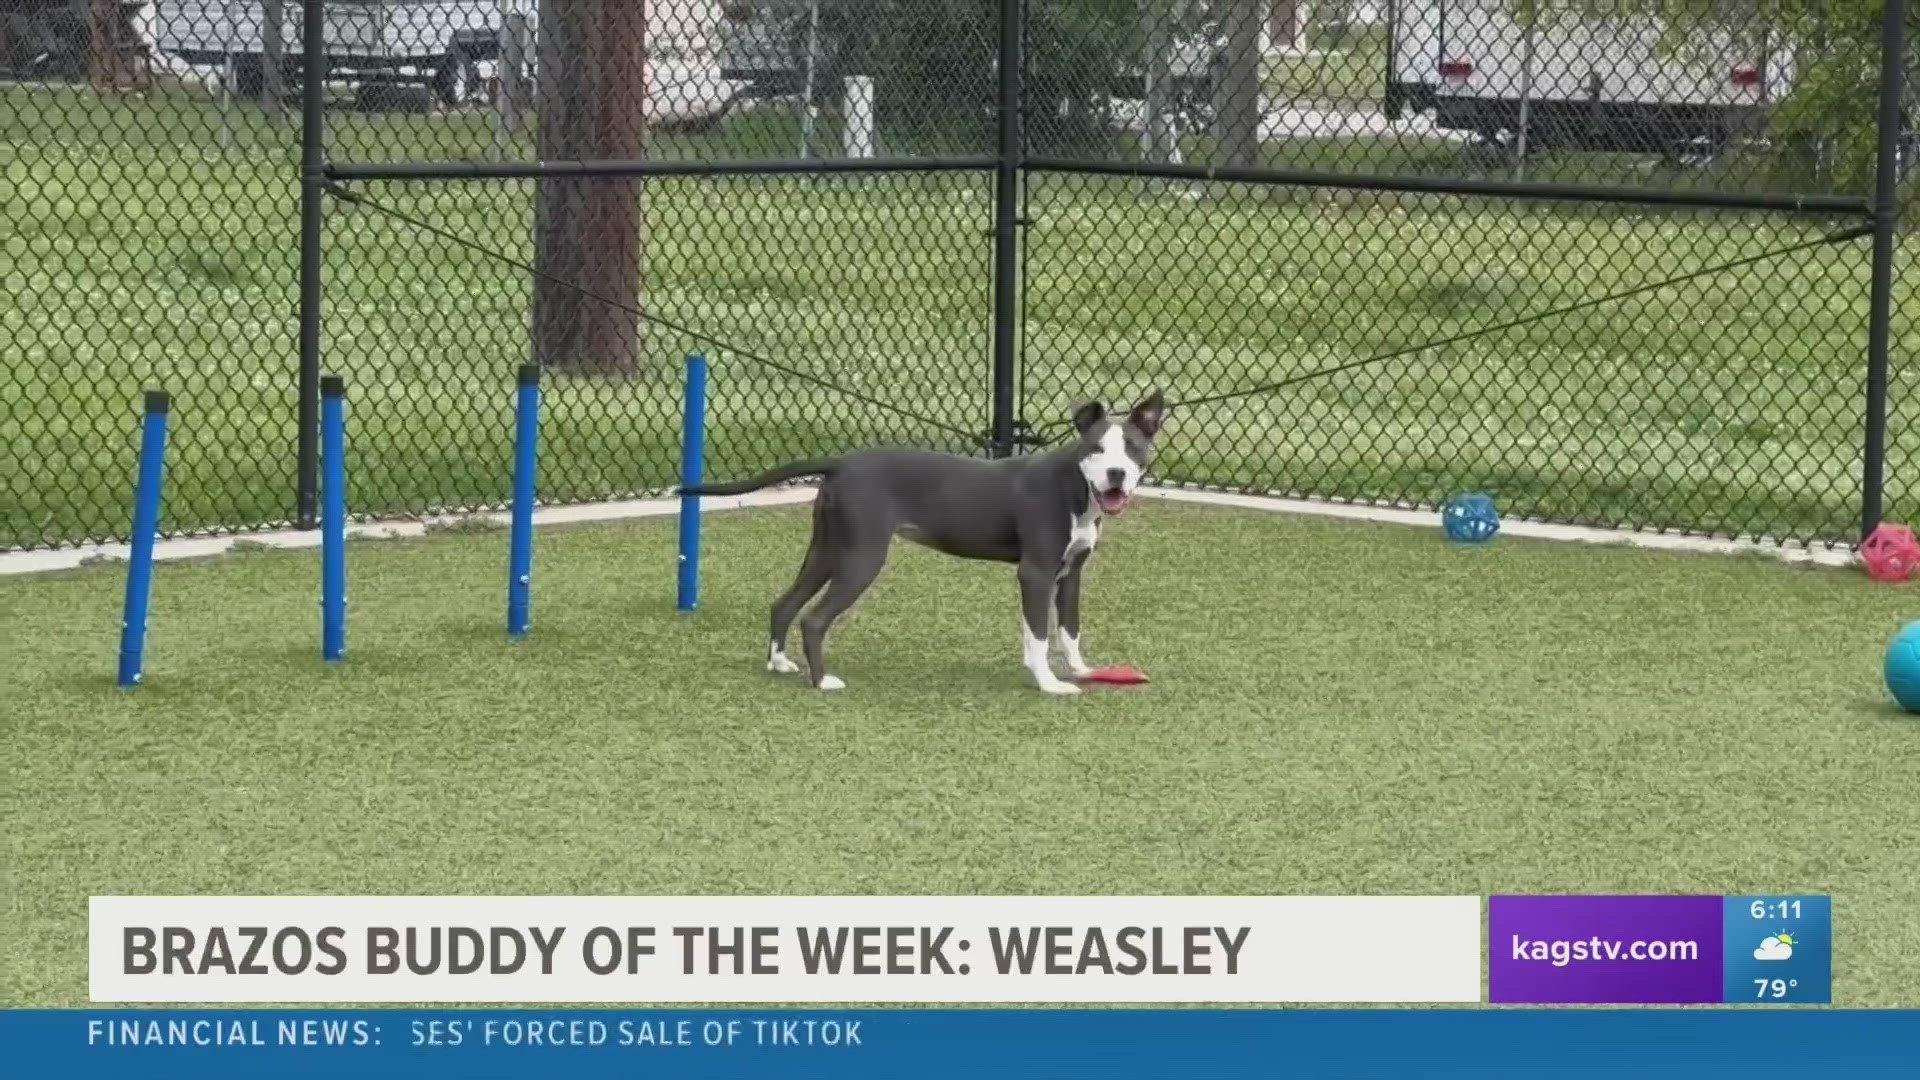 This week's featured Brazos Buddy is Weasley, an eight-month-old Pit Bull mix that's looking to be adopted.